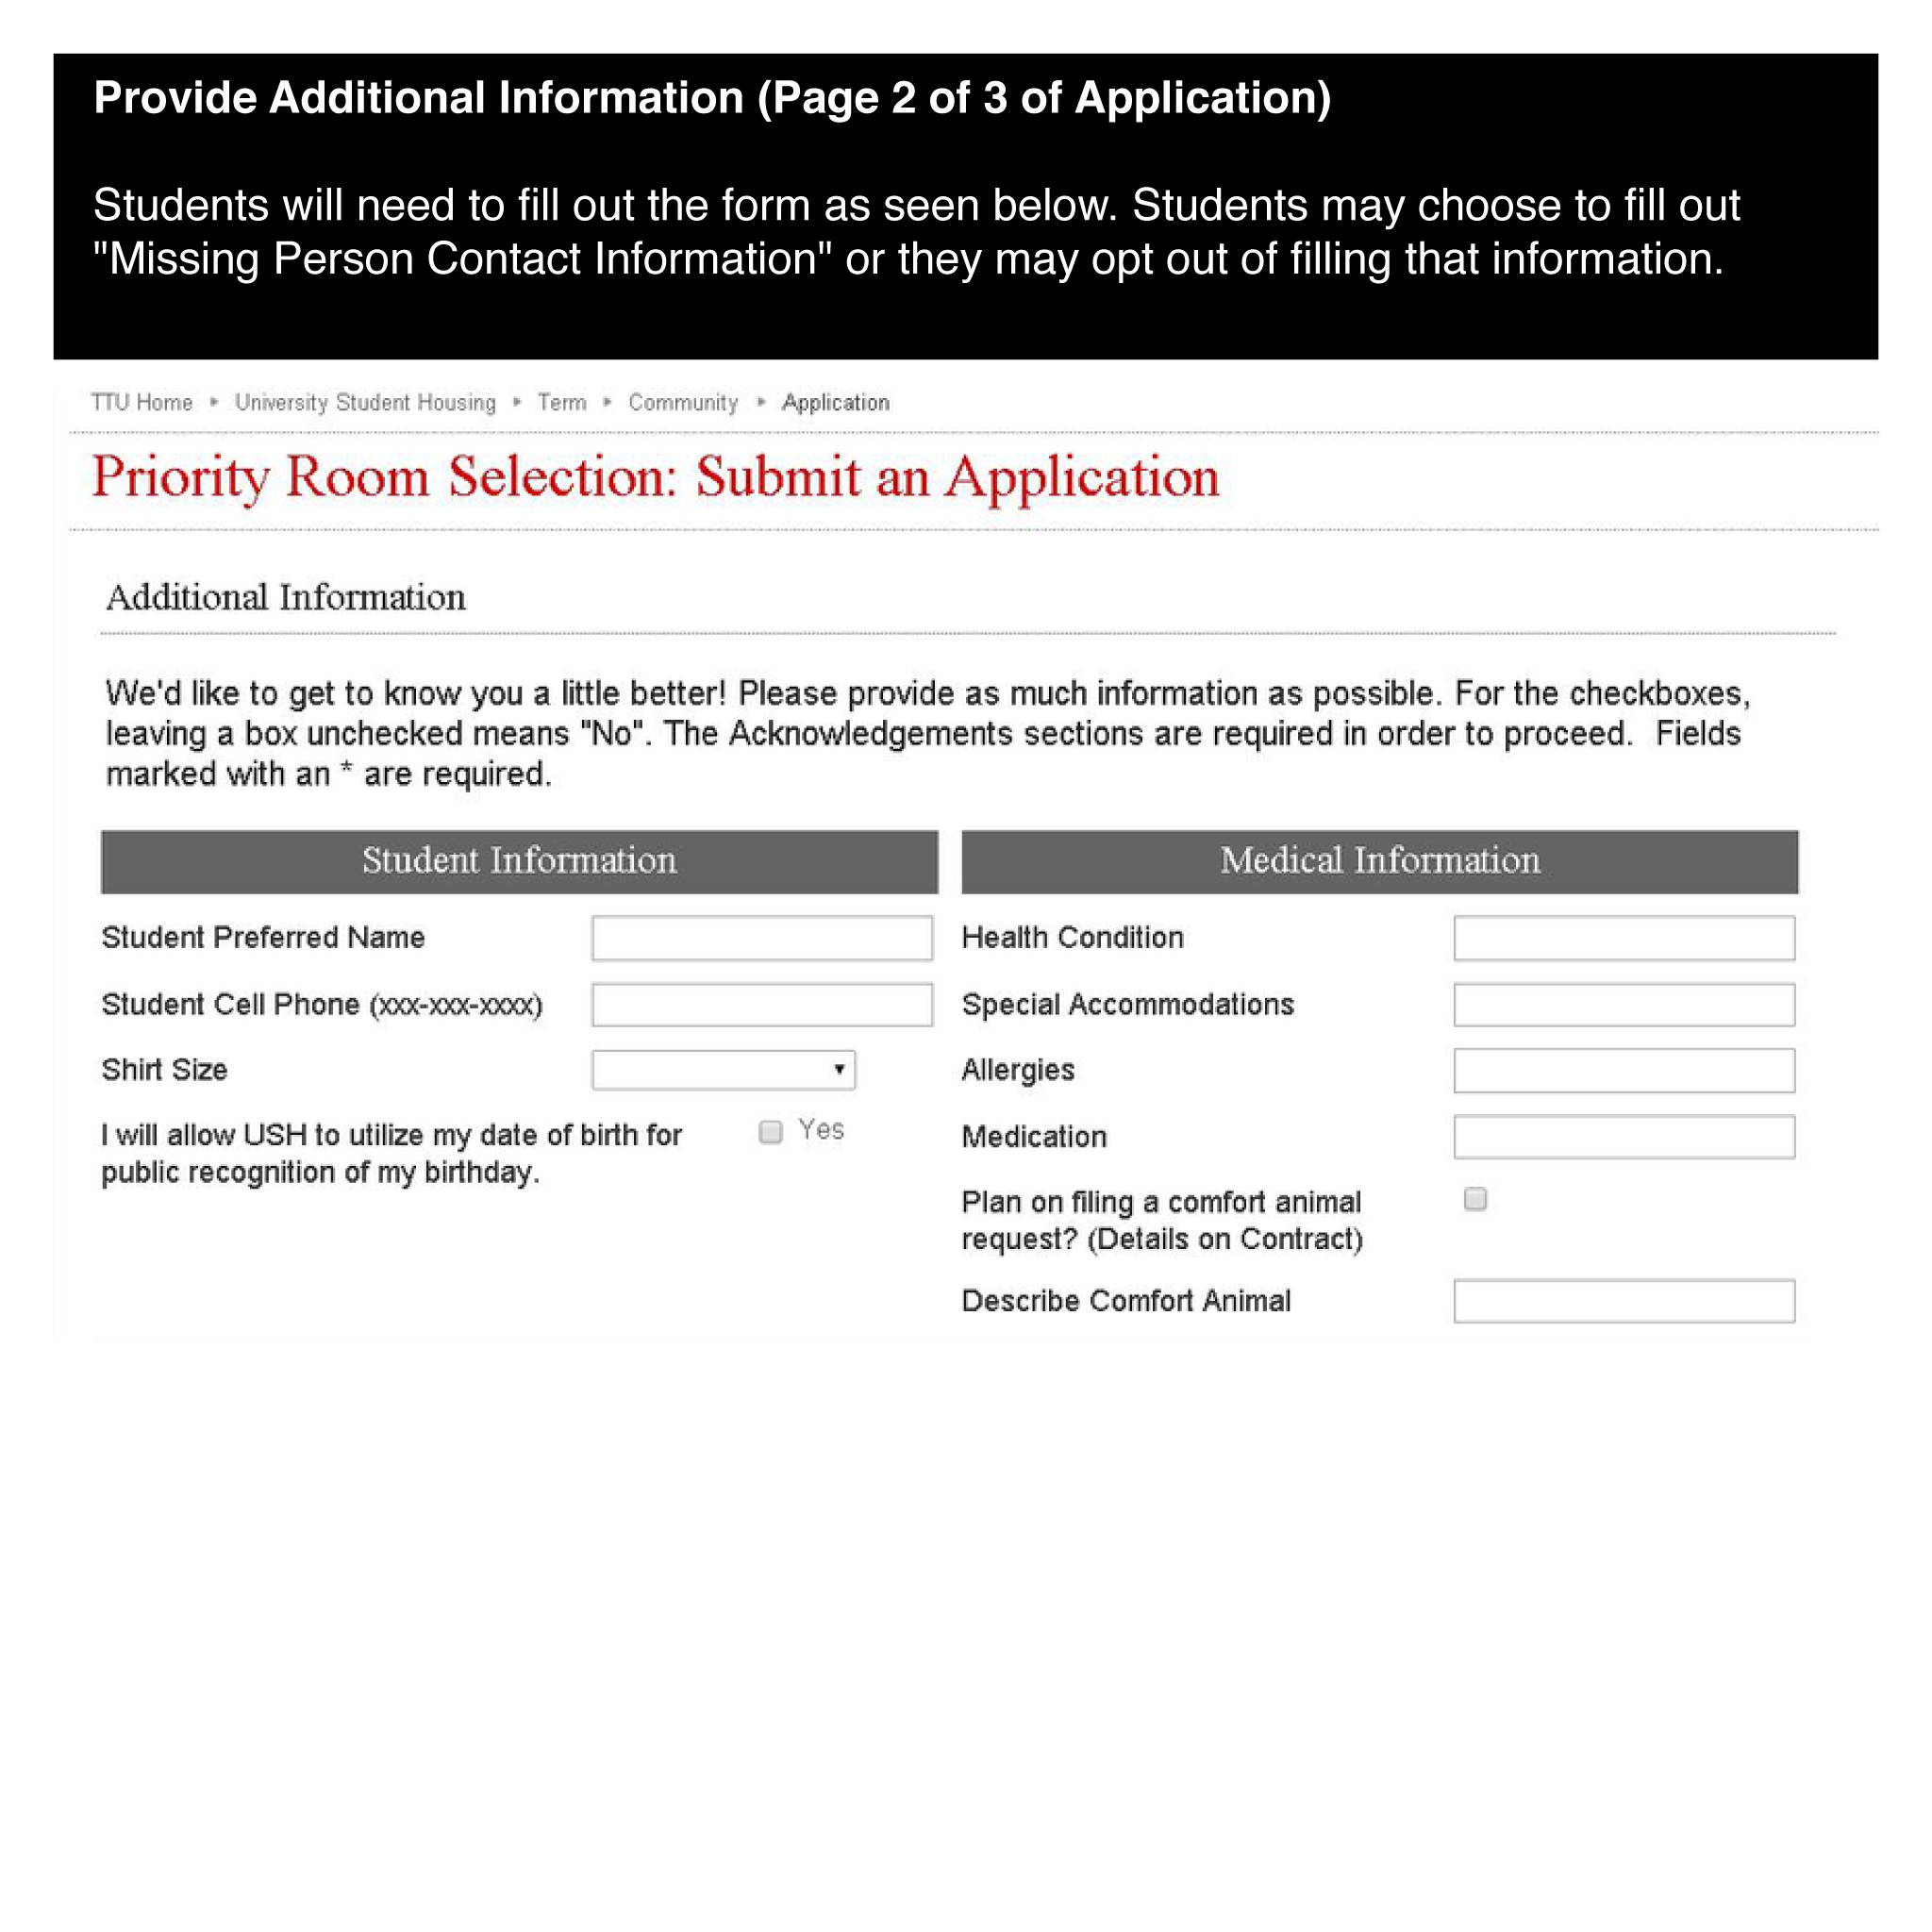 Provide Additional Information (Page 2 of 3 of Application)Students will need to fill out the form as seen below. Students may choose to fill out Missing Person Contact Information or they may opt out of filling that information.